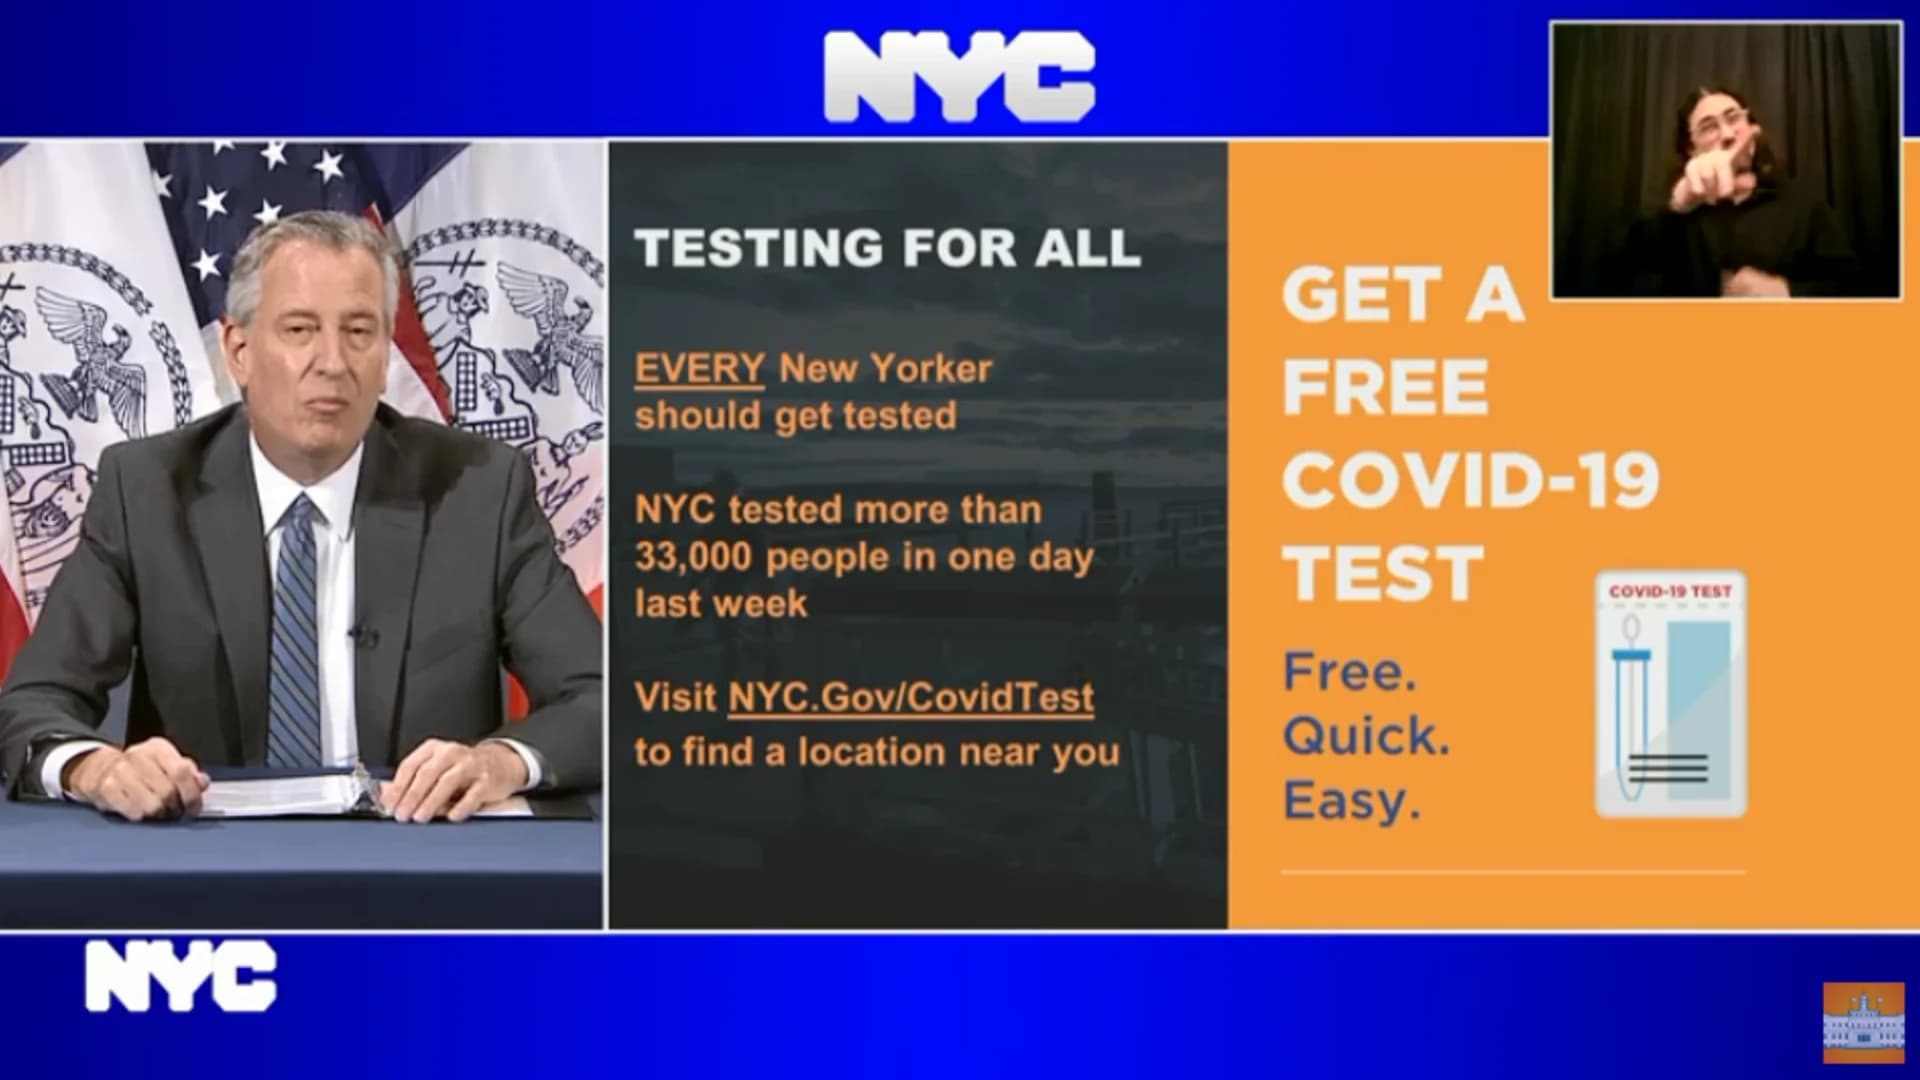 NYC to roll out mobile COVID-19 testing trucks starting in Soundview on June 9